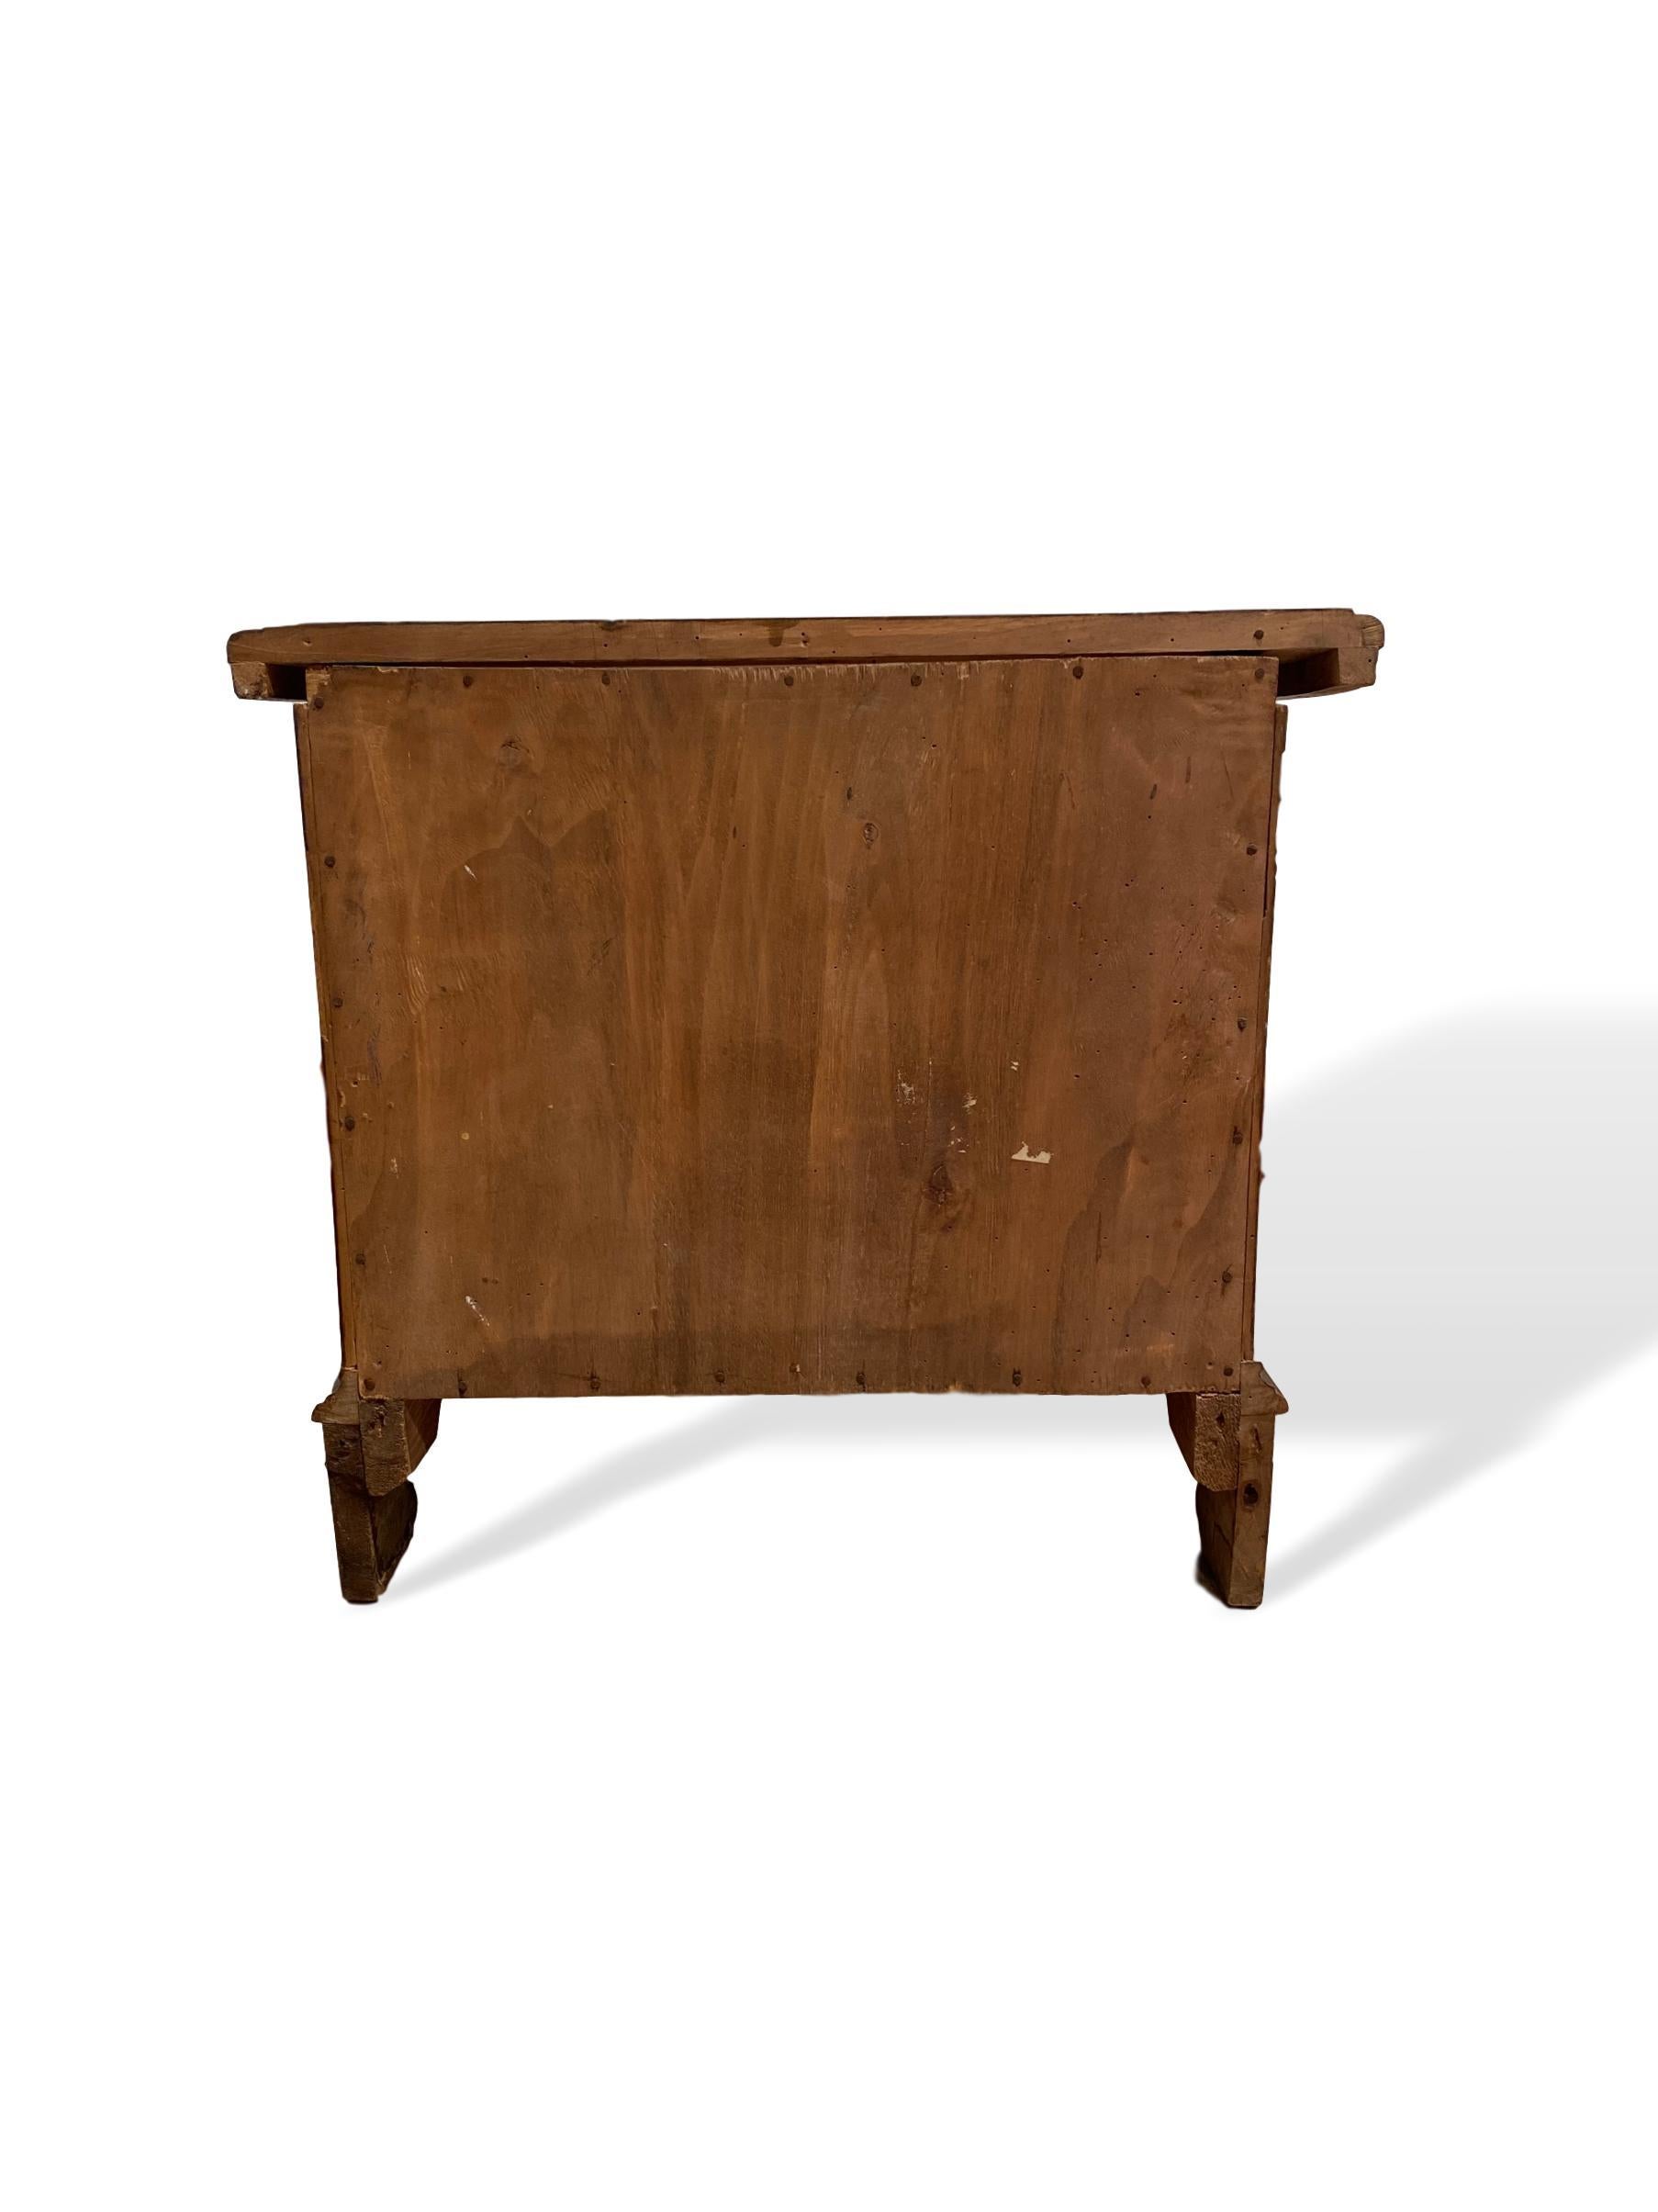 Inlaid Walnut Two-Drawer Side Commode with Concave Block Front, Italian In Good Condition For Sale In Banner Elk, NC